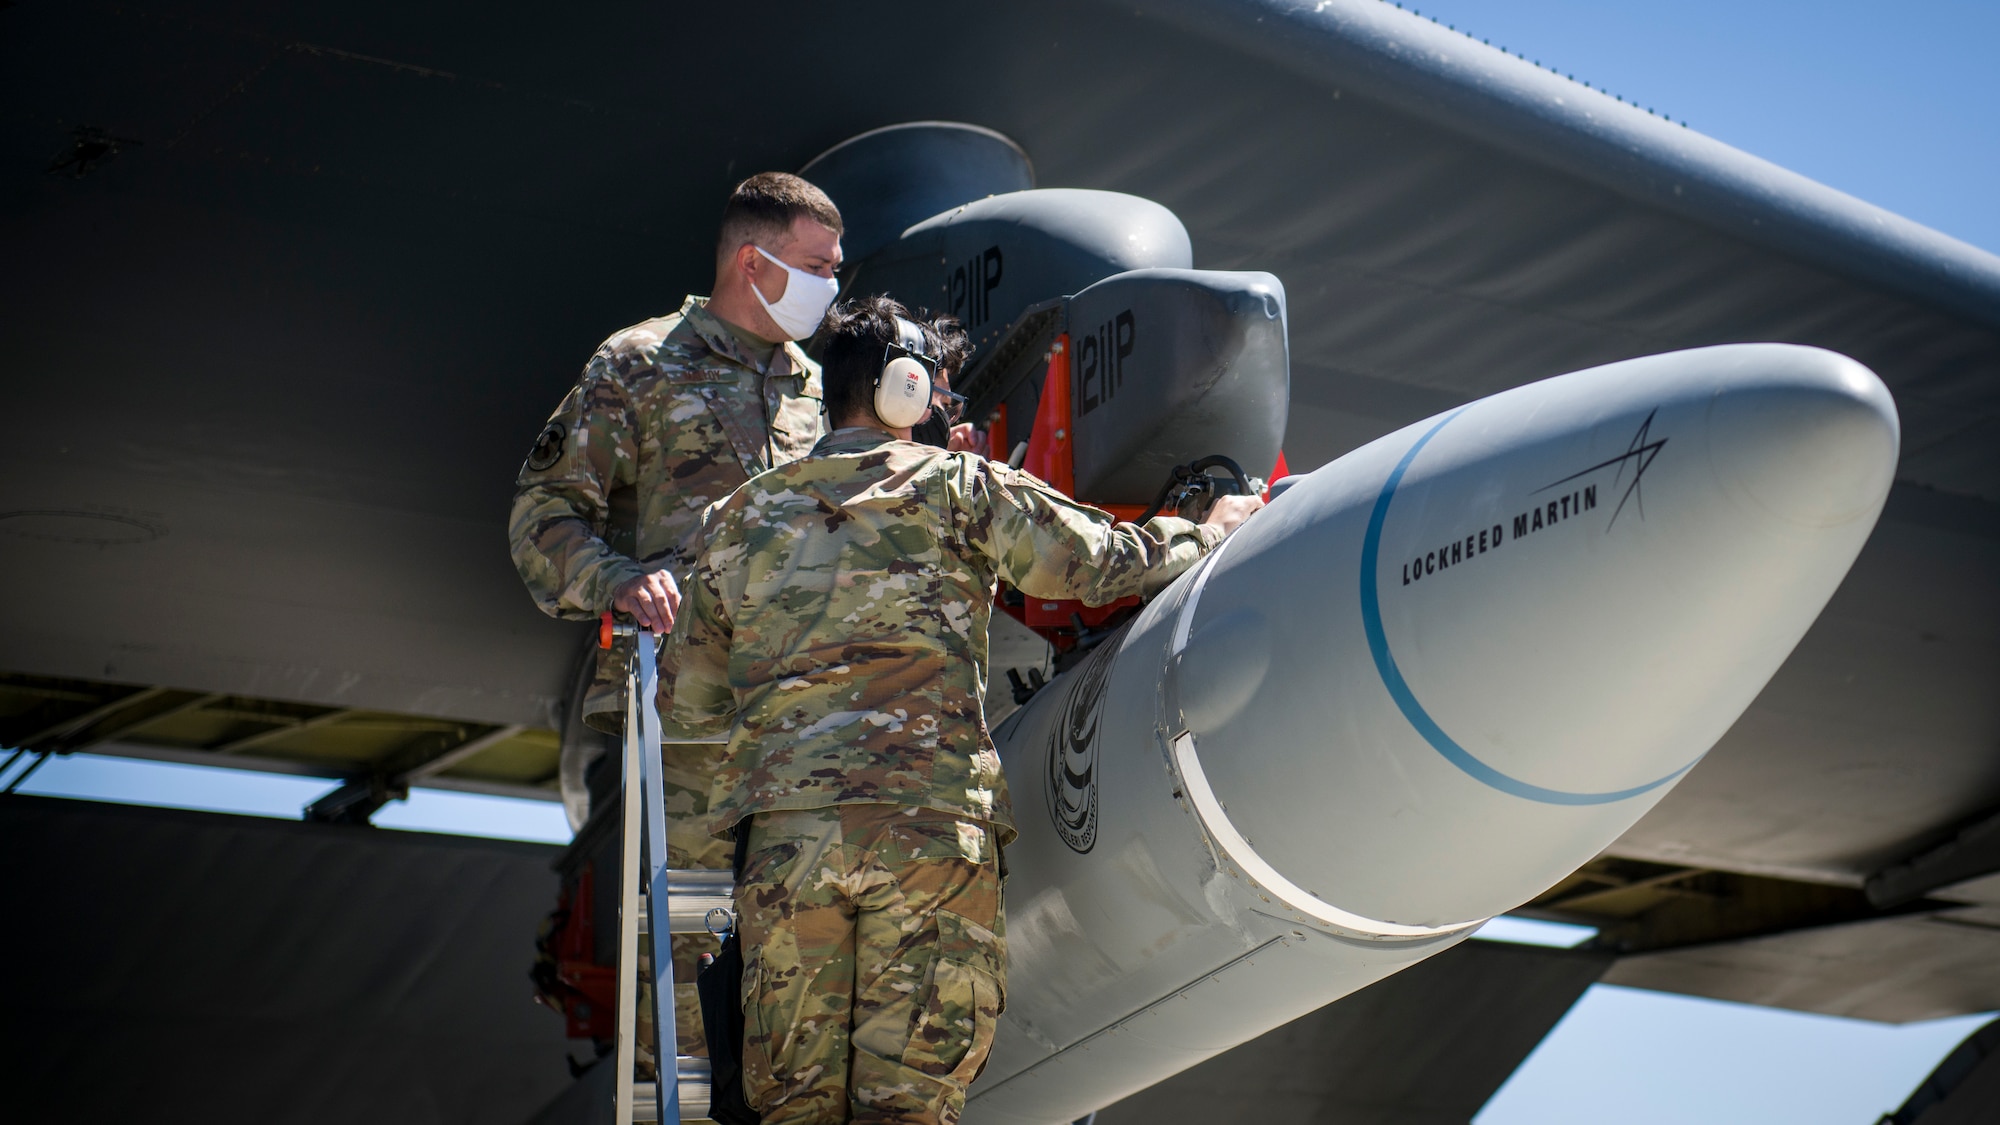 Master Sgt. John Malloy and Staff Sgt. Jacob Puente, both from 912th Aircraft Maintenance Squadron, secure the AGM-183A Air-launched Rapid Response Weapon Instrumented Measurement Vehicle 2 as it is loaded under the wing of a B-52H Stratofortress at Edwards Air Force Base, California, Aug. 6. The ARRW IMV-2 successfully completed a captive carry test off the Southern California coast, Aug. 8. (Air Force photo by Giancarlo Casem)